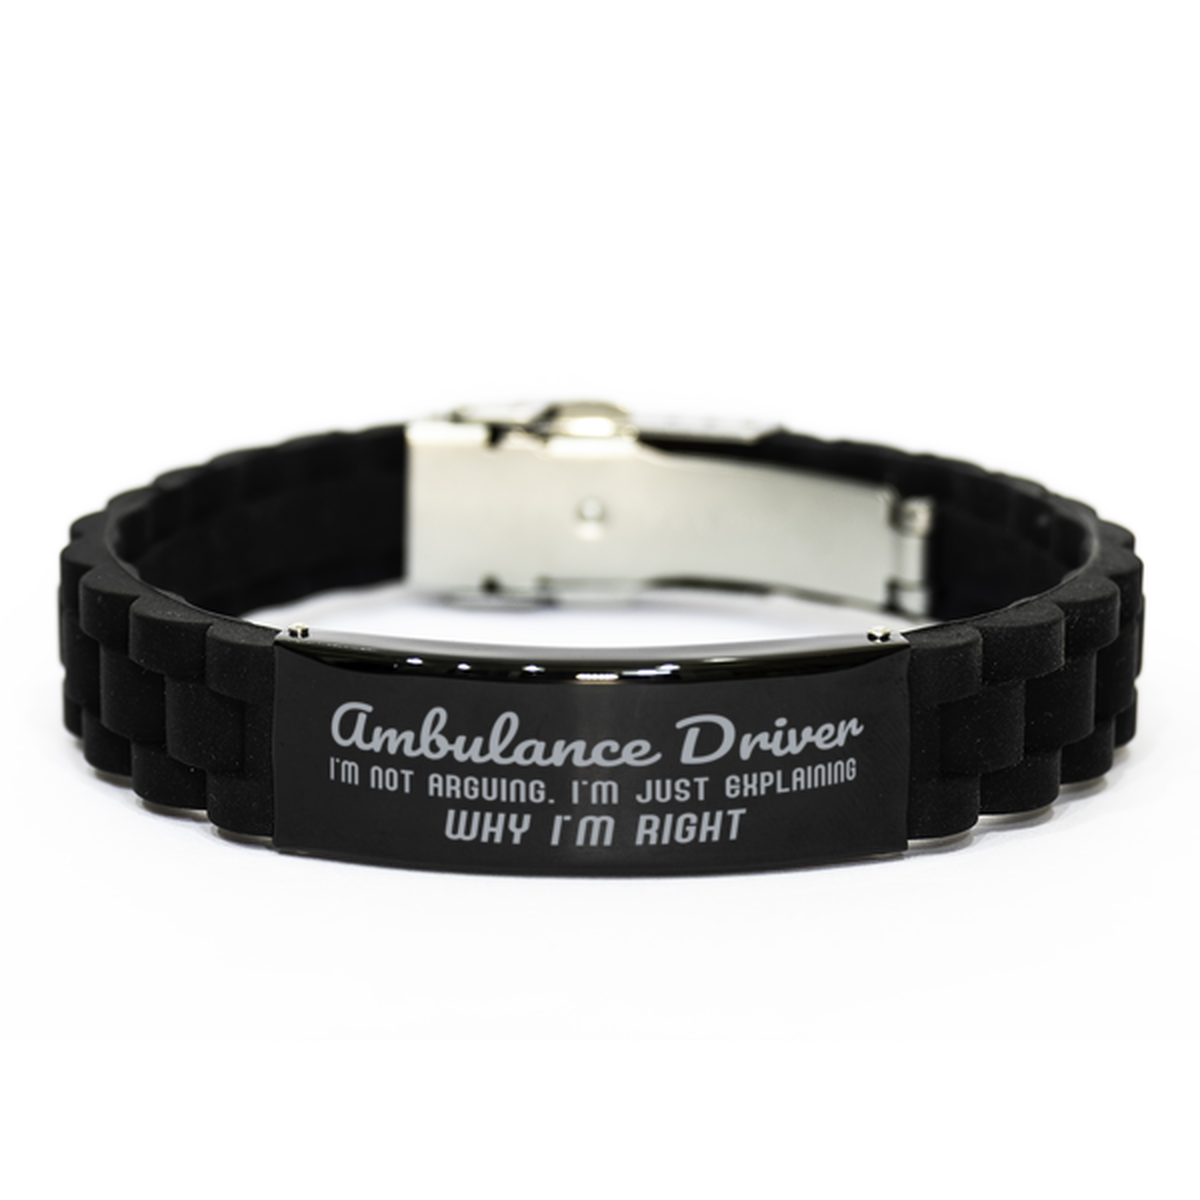 Ambulance Driver I'm not Arguing. I'm Just Explaining Why I'm RIGHT Black Glidelock Clasp Bracelet, Funny Saying Quote Ambulance Driver Gifts For Ambulance Driver Graduation Birthday Christmas Gifts for Men Women Coworker